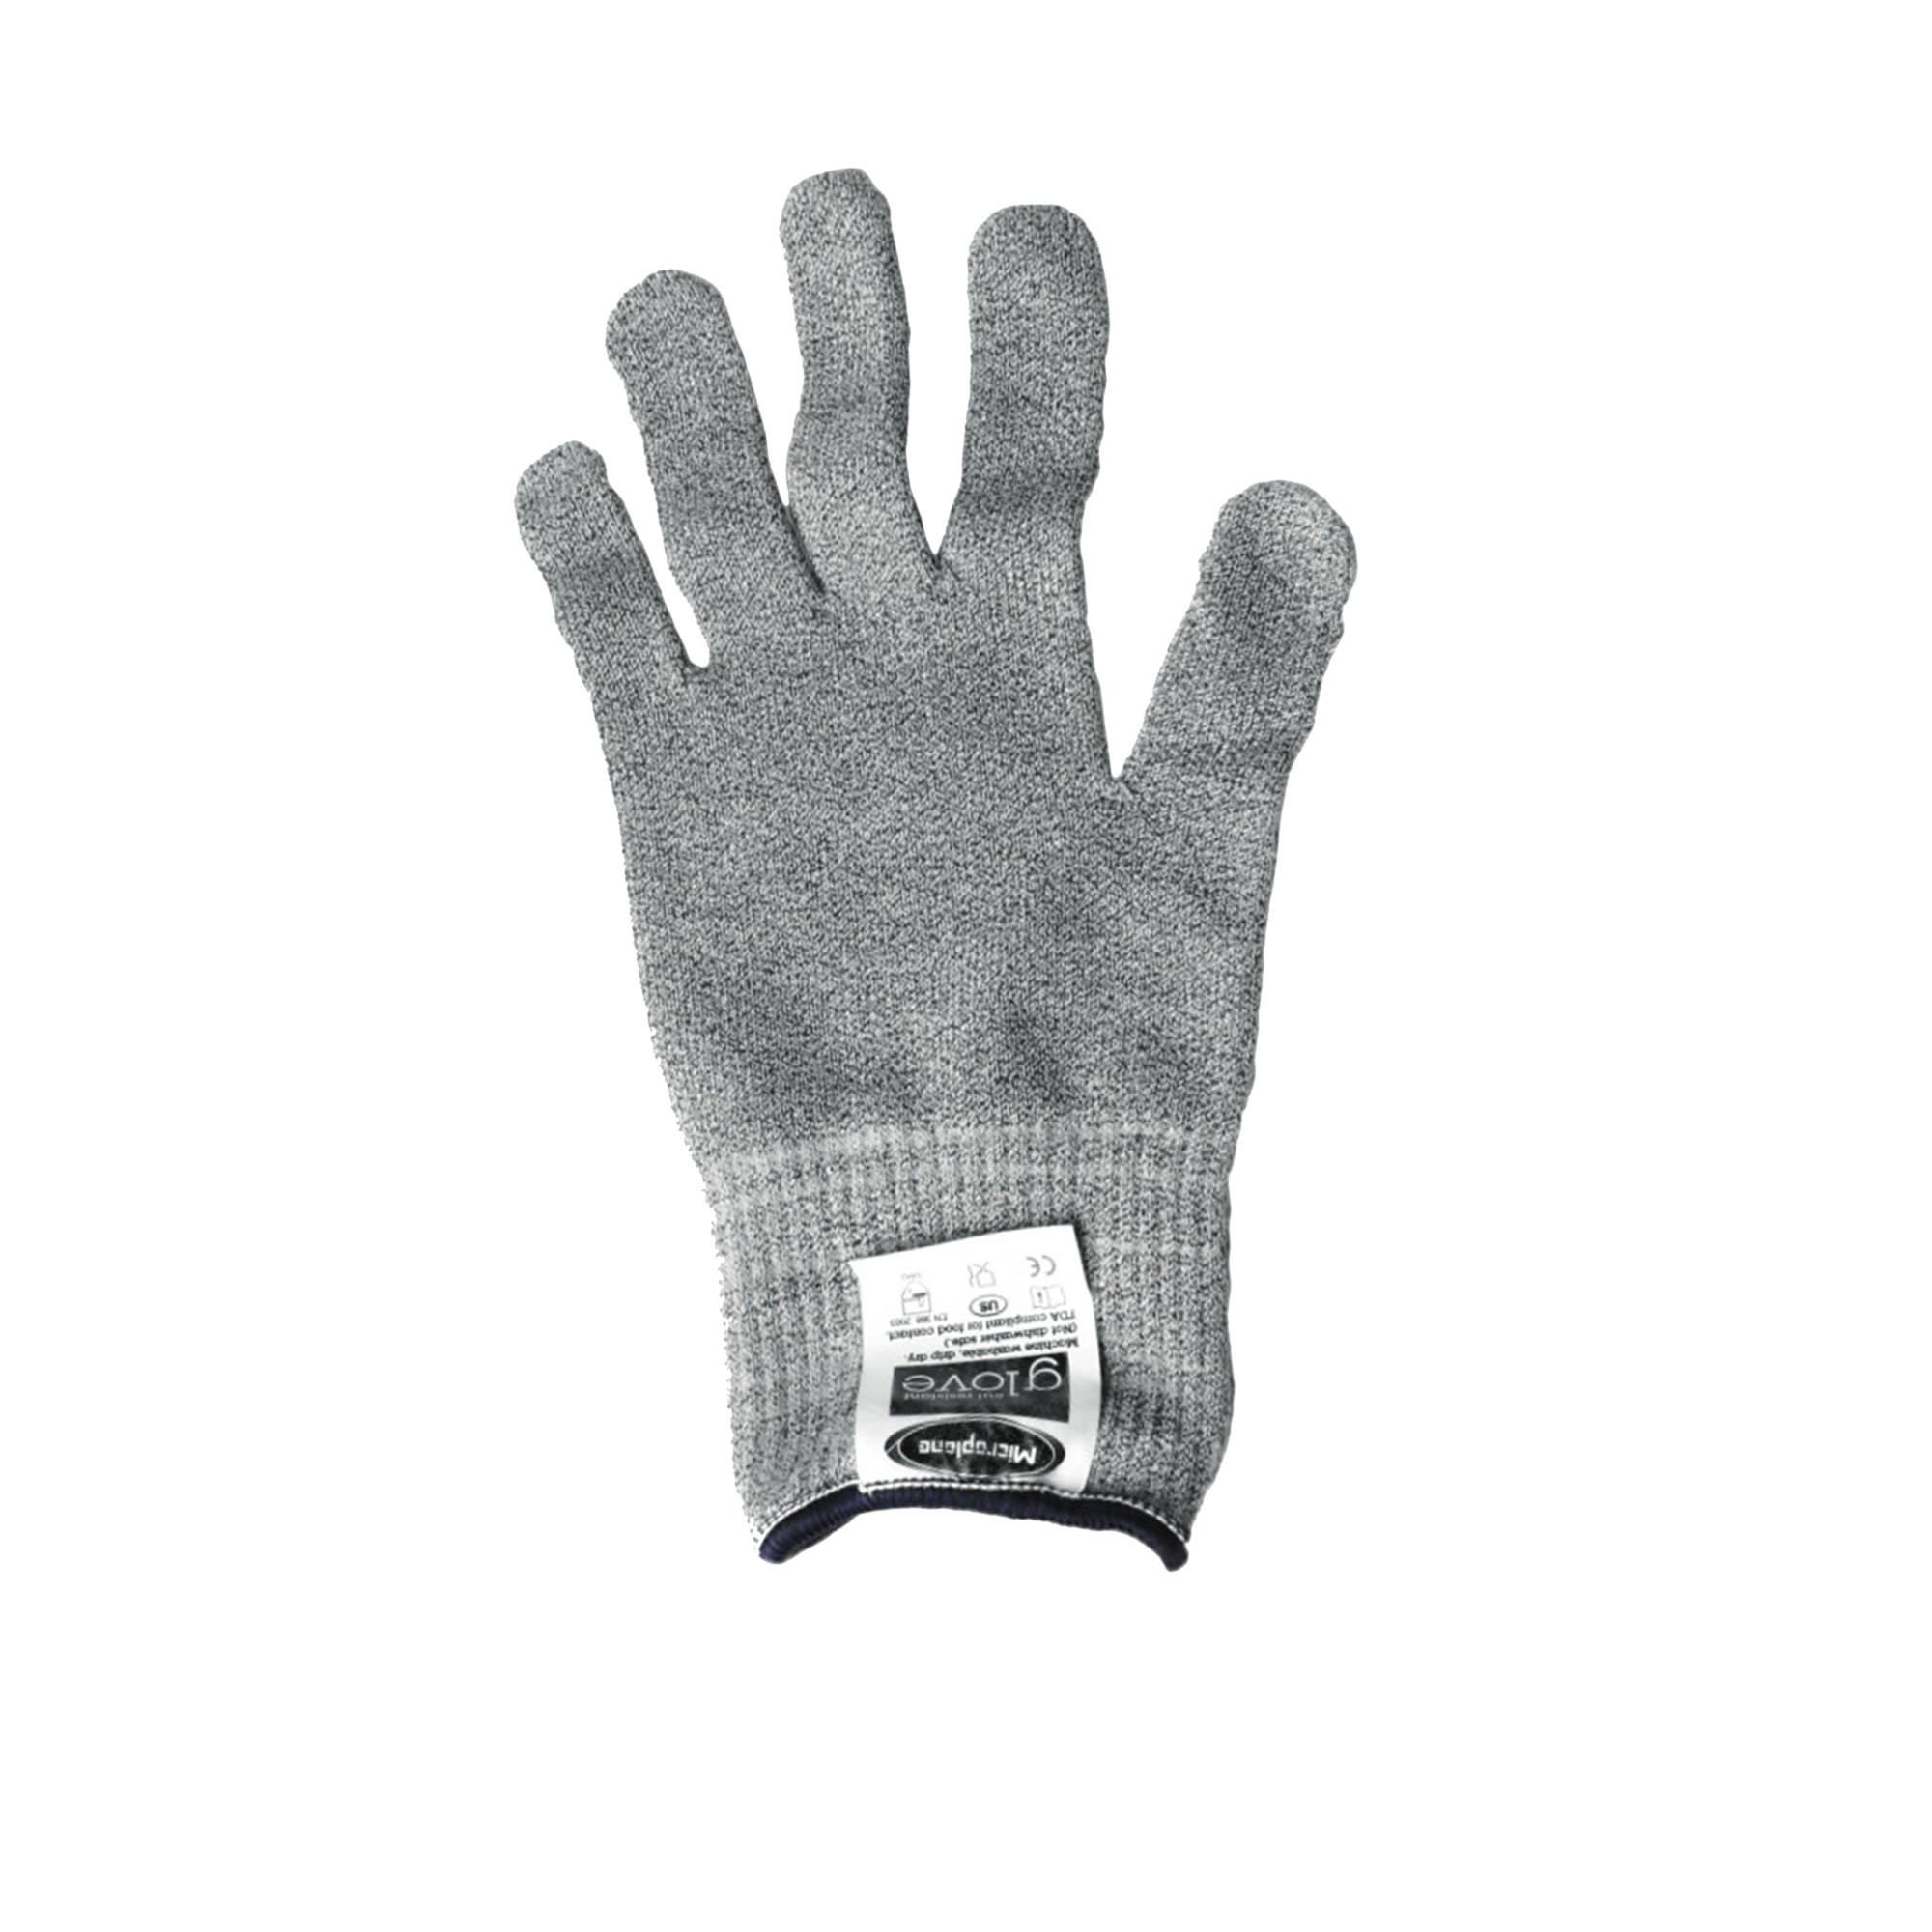 Microplane Specialty Series Cut Resistant Glove Image 1